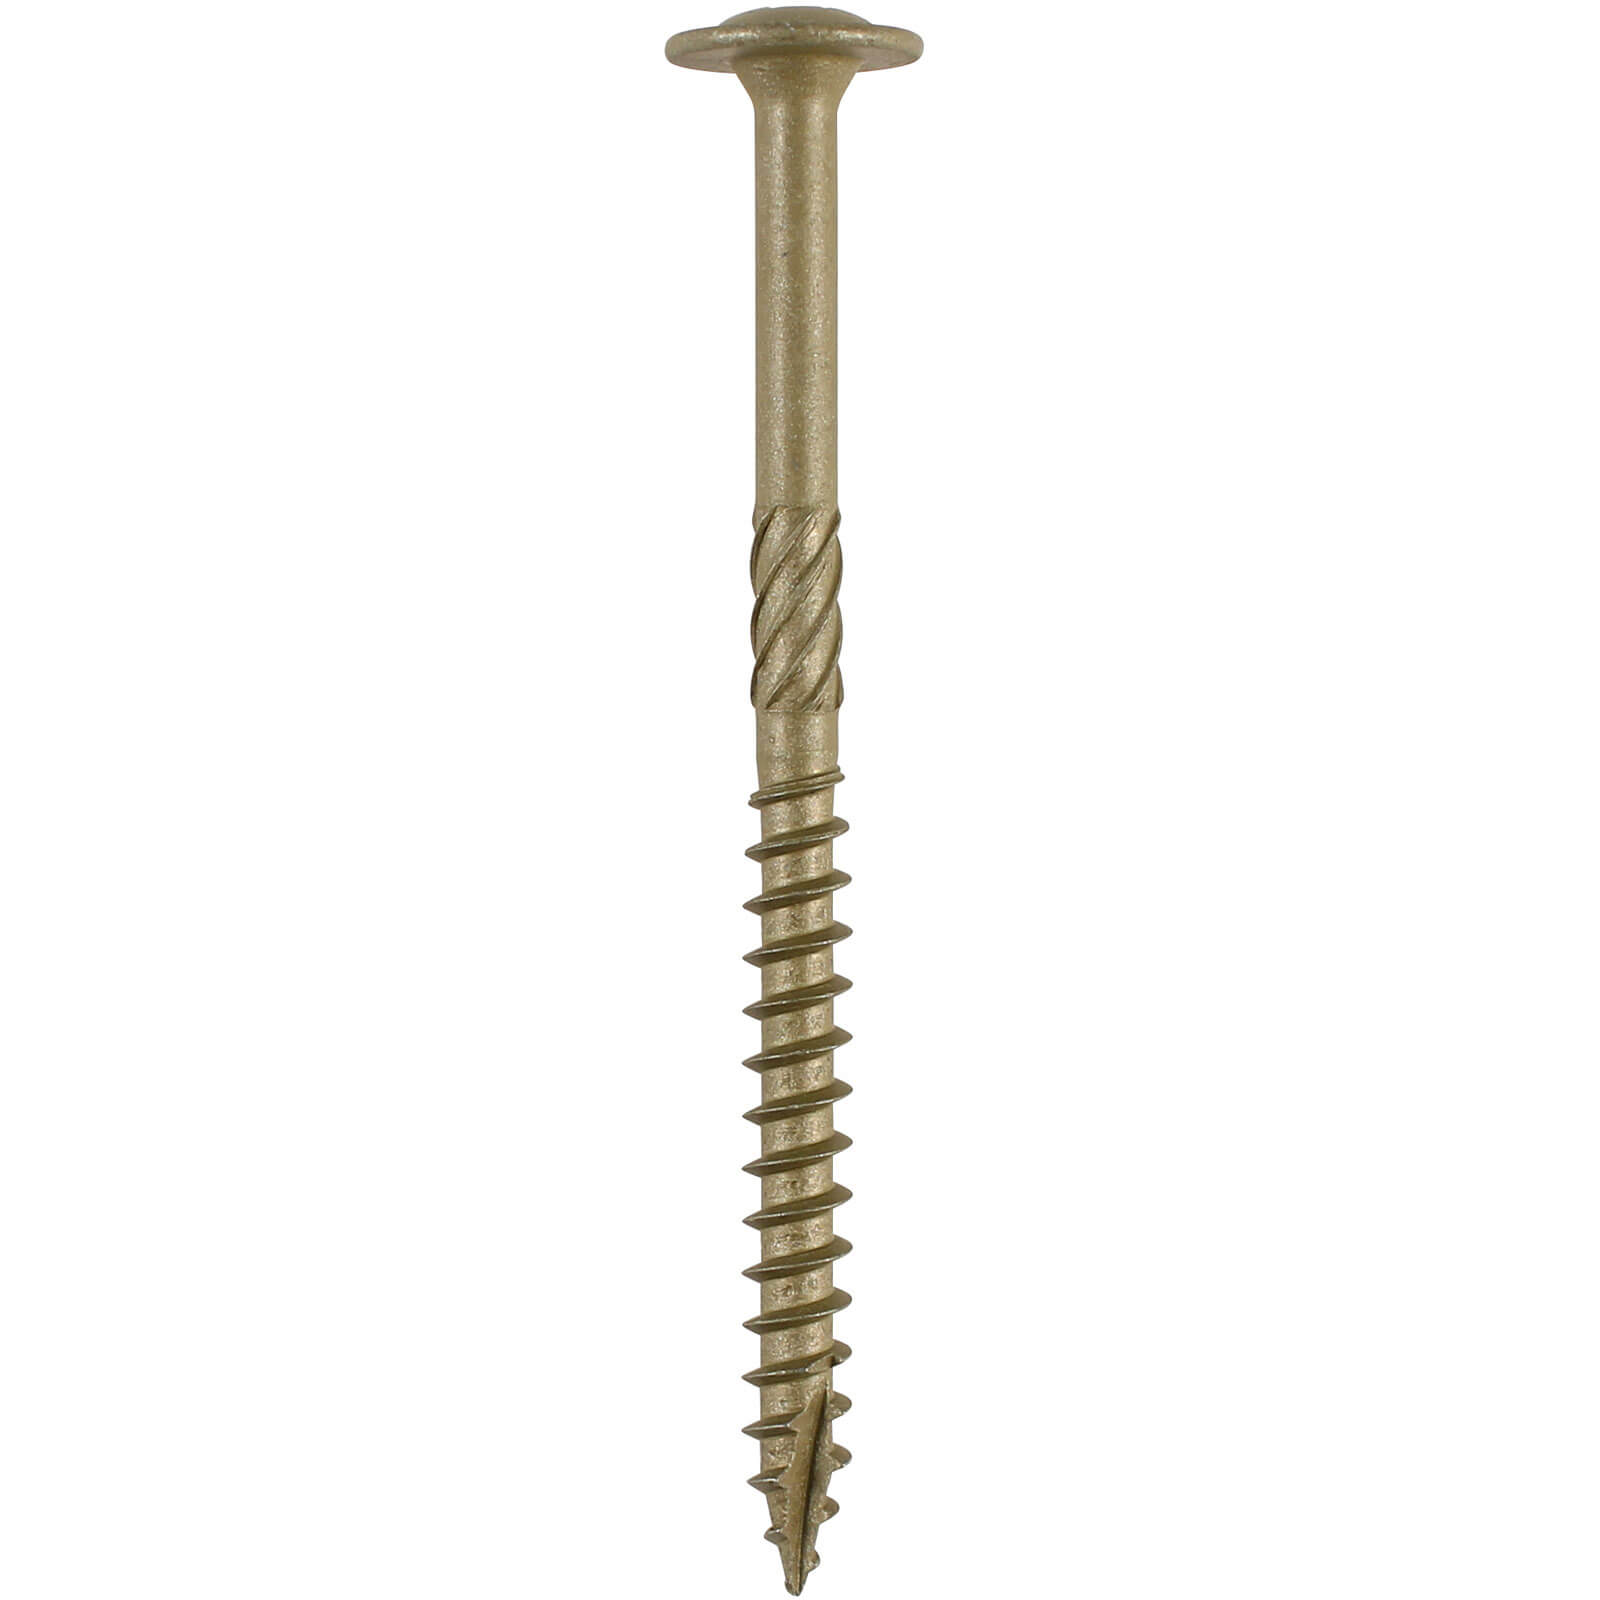 Photos - Nail / Screw / Fastener TIMCO Wafer Torx Head Index Wood Screws 8mm 300mm Pack of 25 300INW 